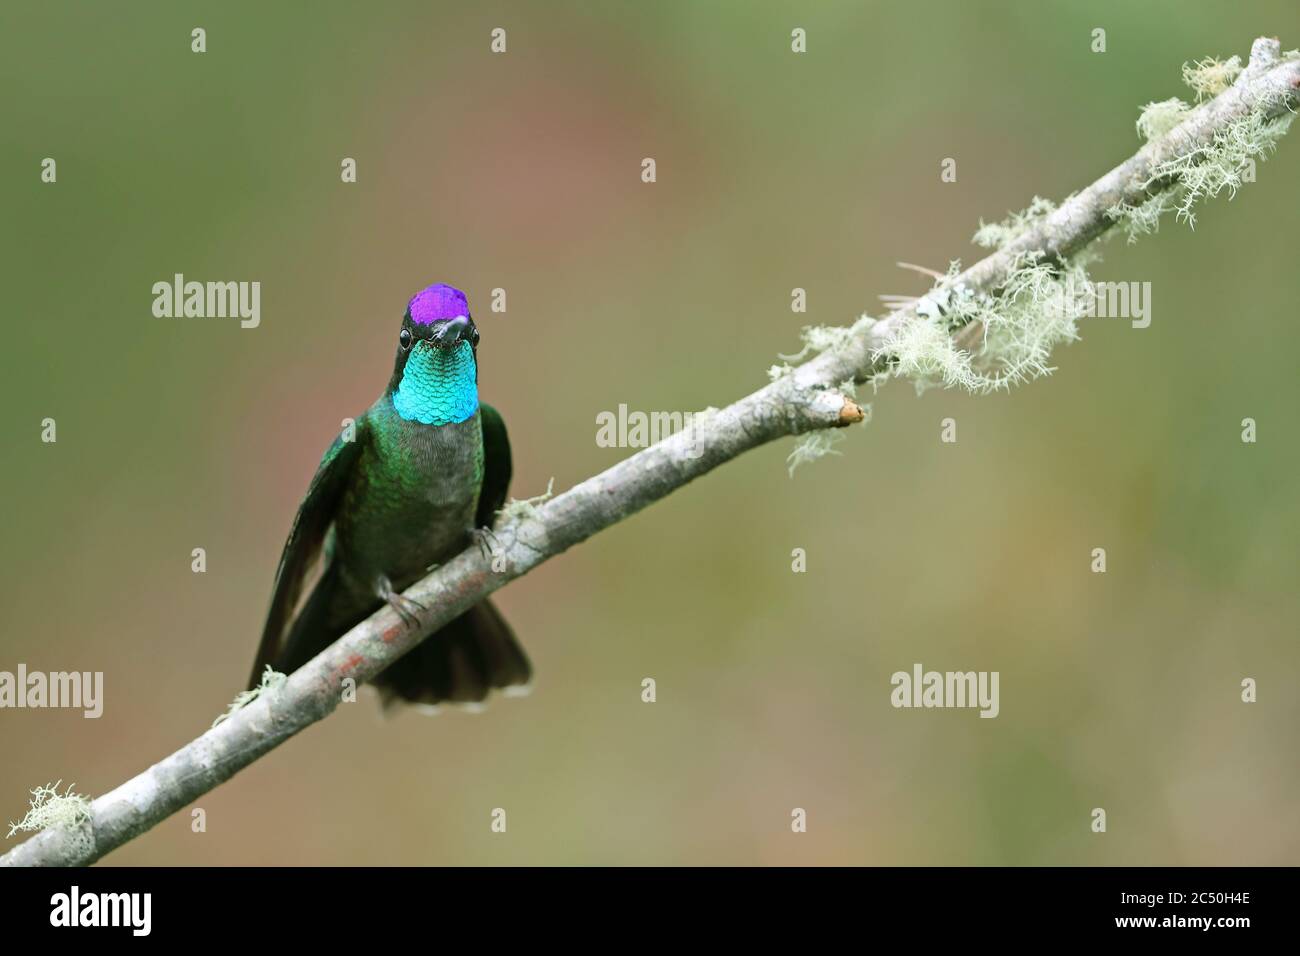 Talamanca hummingbird (Eugenes spectabilis), male perching on a twig, front view, Costa Rica, Los Quetzales National Park Stock Photo